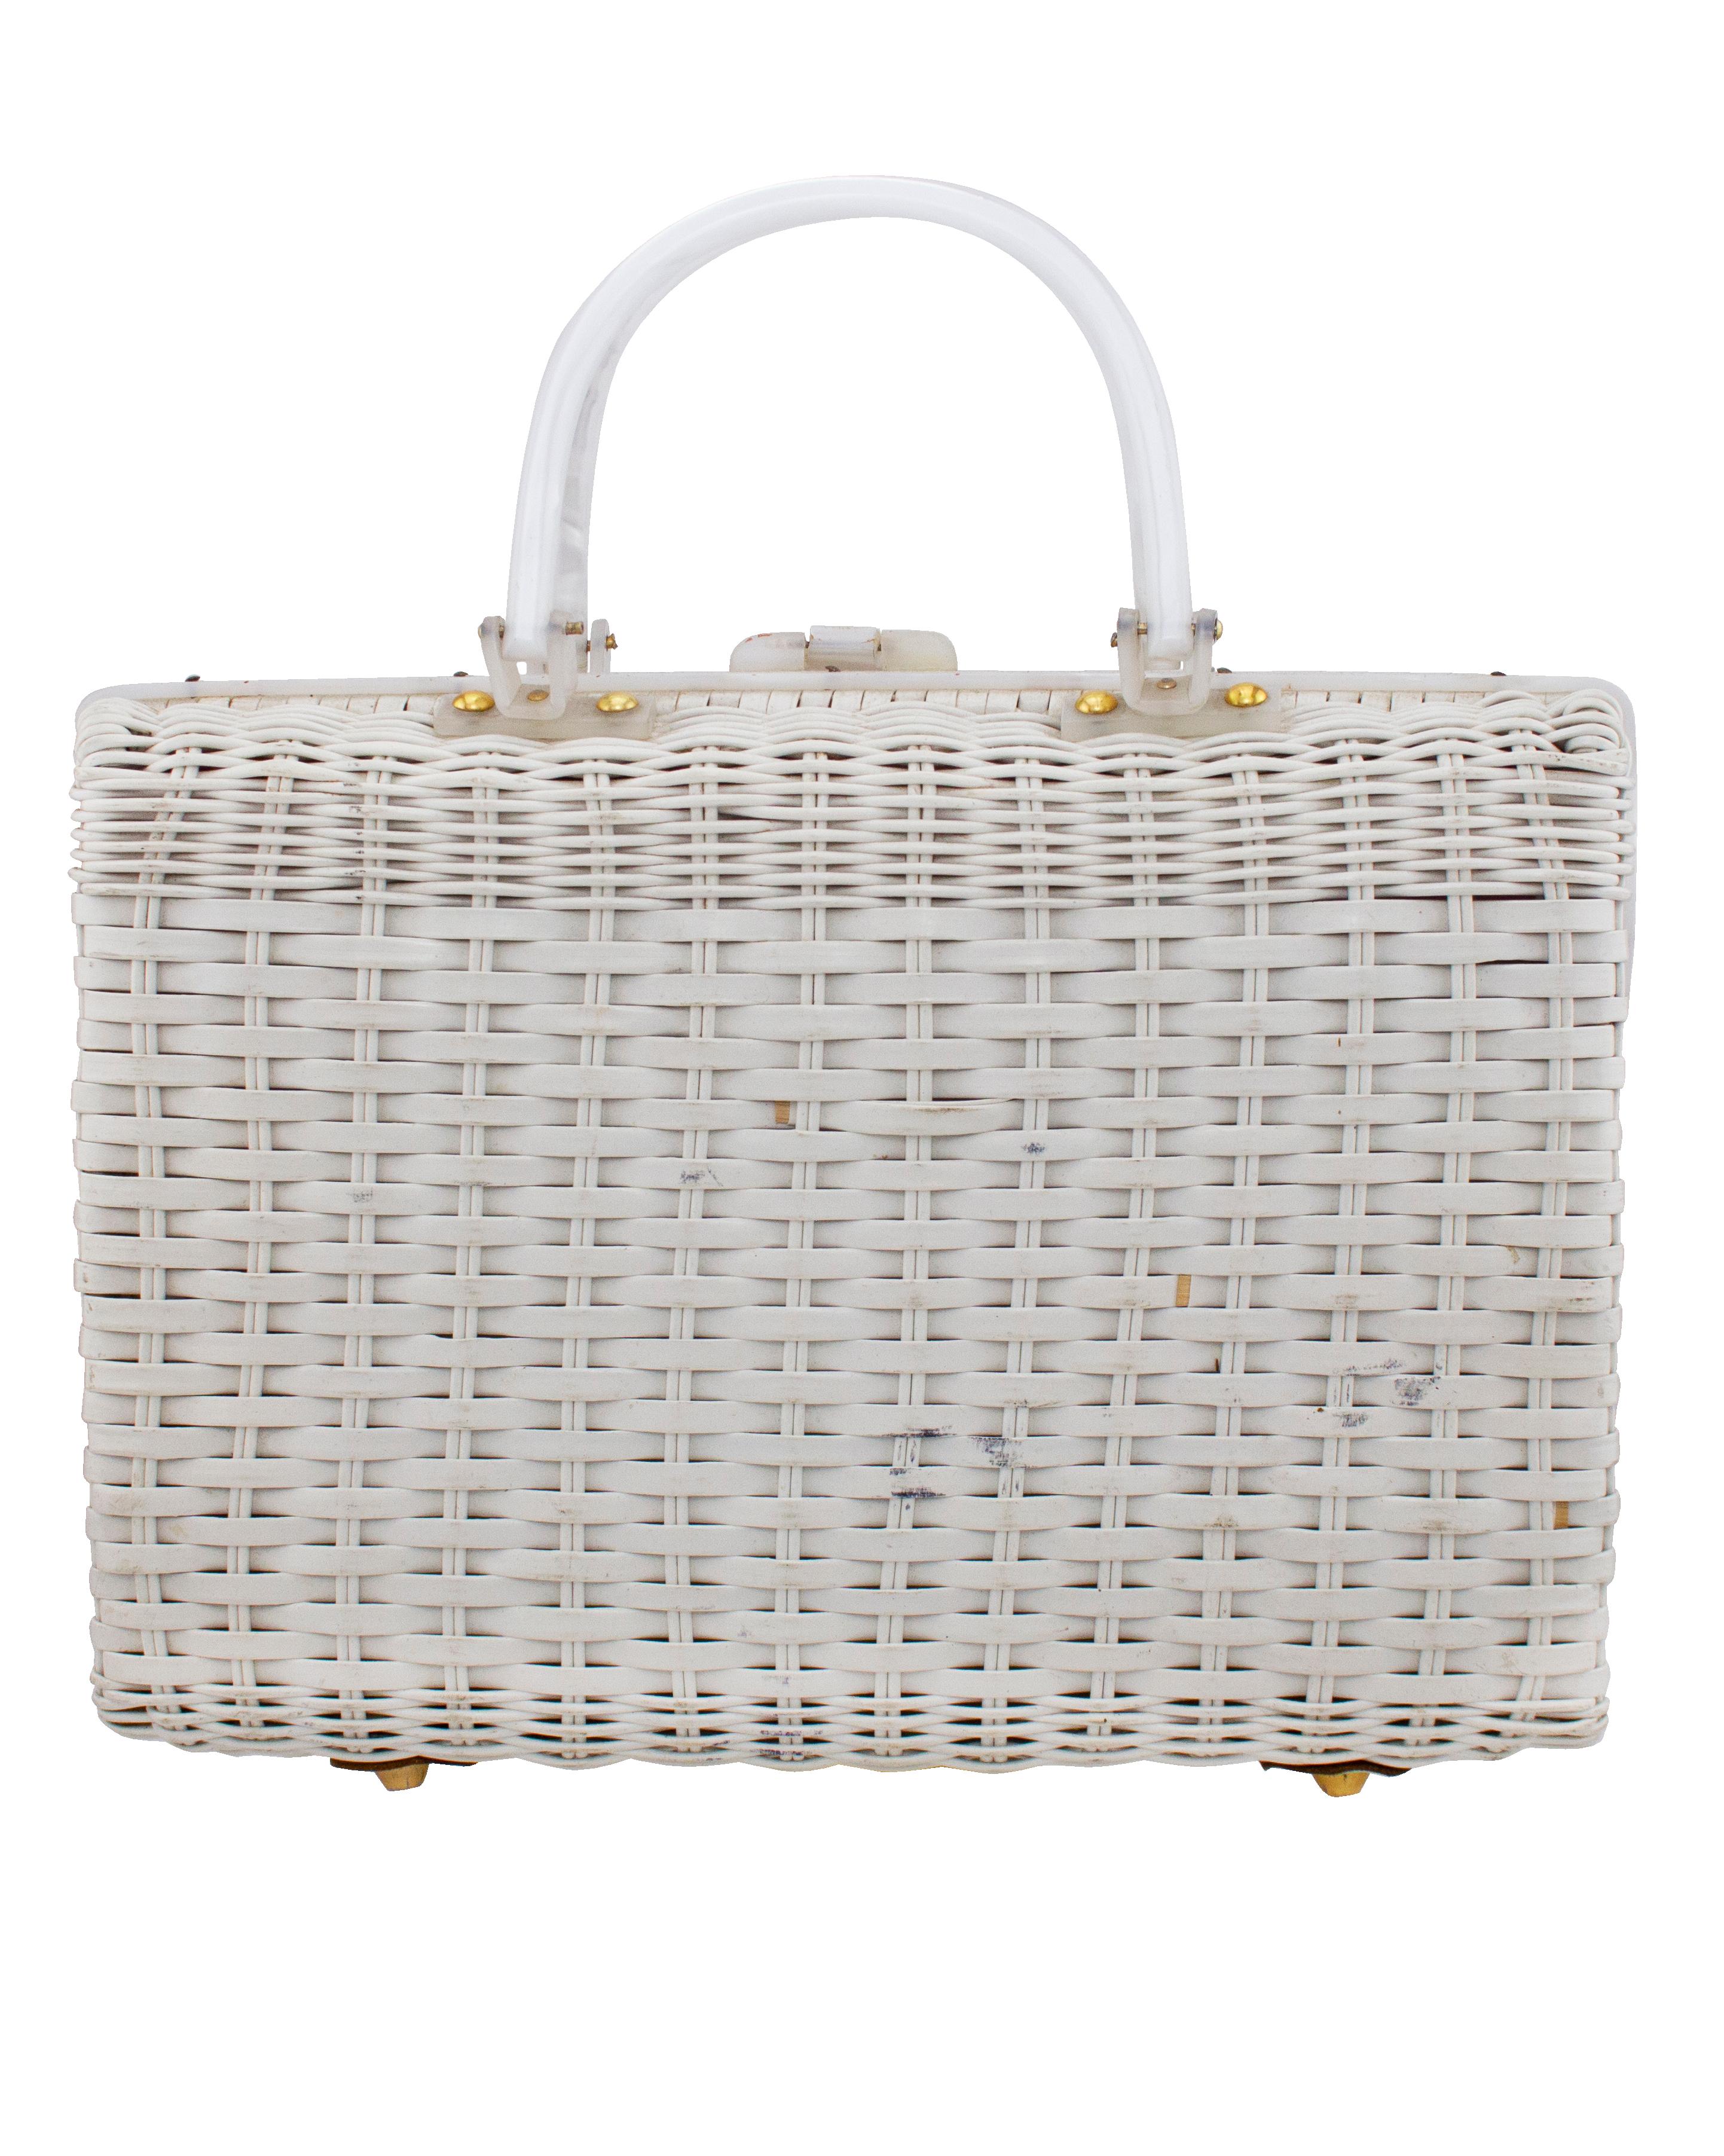 1960s White Wicker and Seashell Bag  In Fair Condition For Sale In Toronto, Ontario